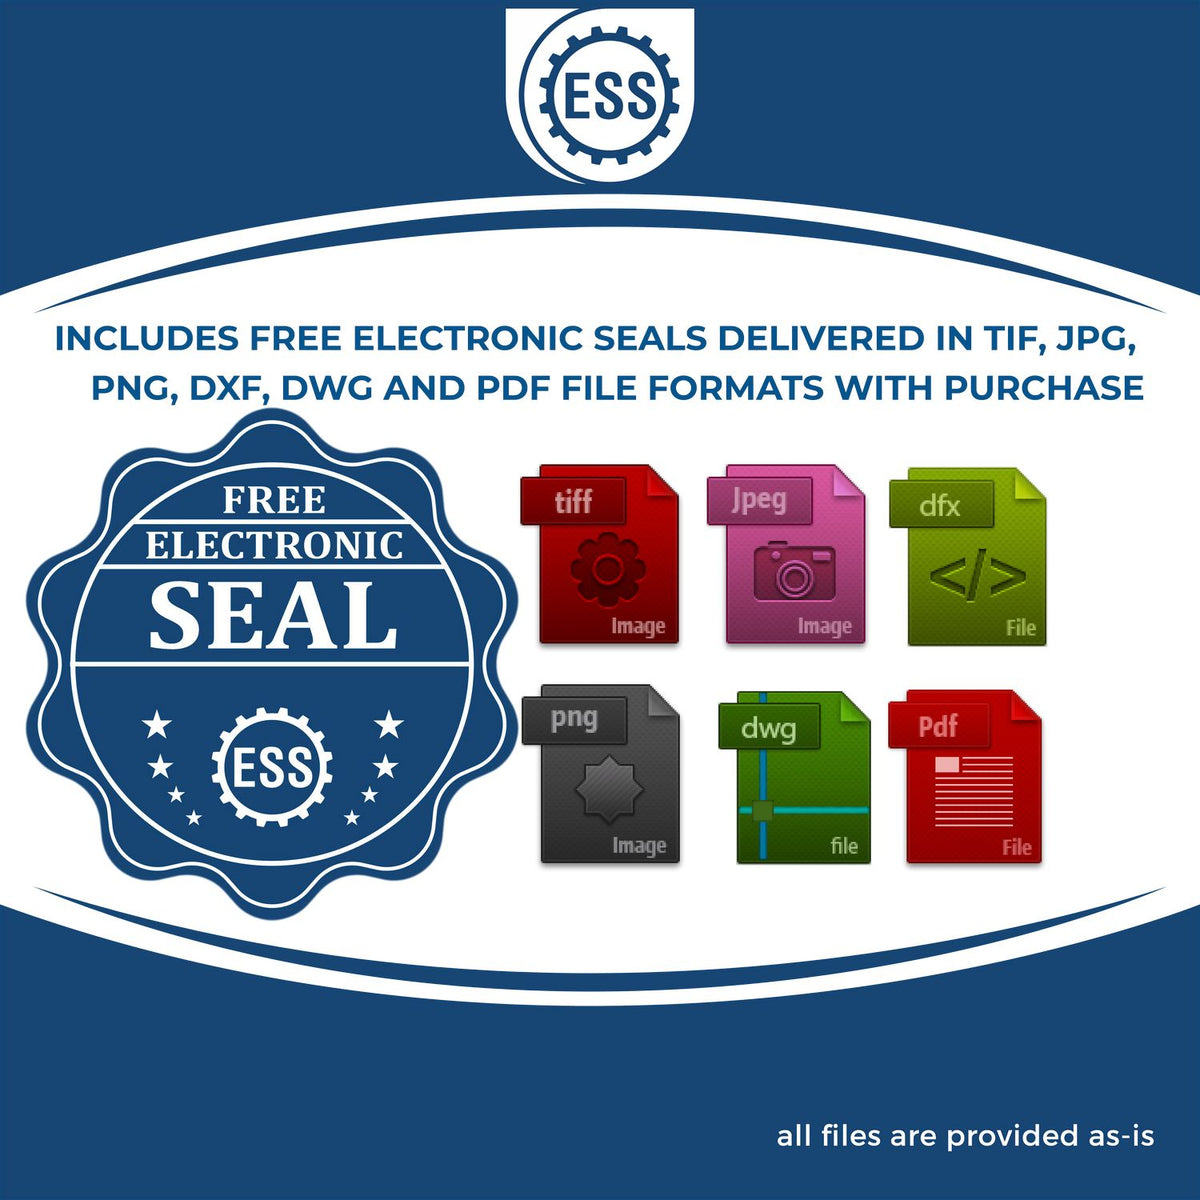 An infographic for the free electronic seal for the Premium MaxLight Pre-Inked Oklahoma Geology Stamp illustrating the different file type icons such as DXF, DWG, TIF, JPG and PNG.